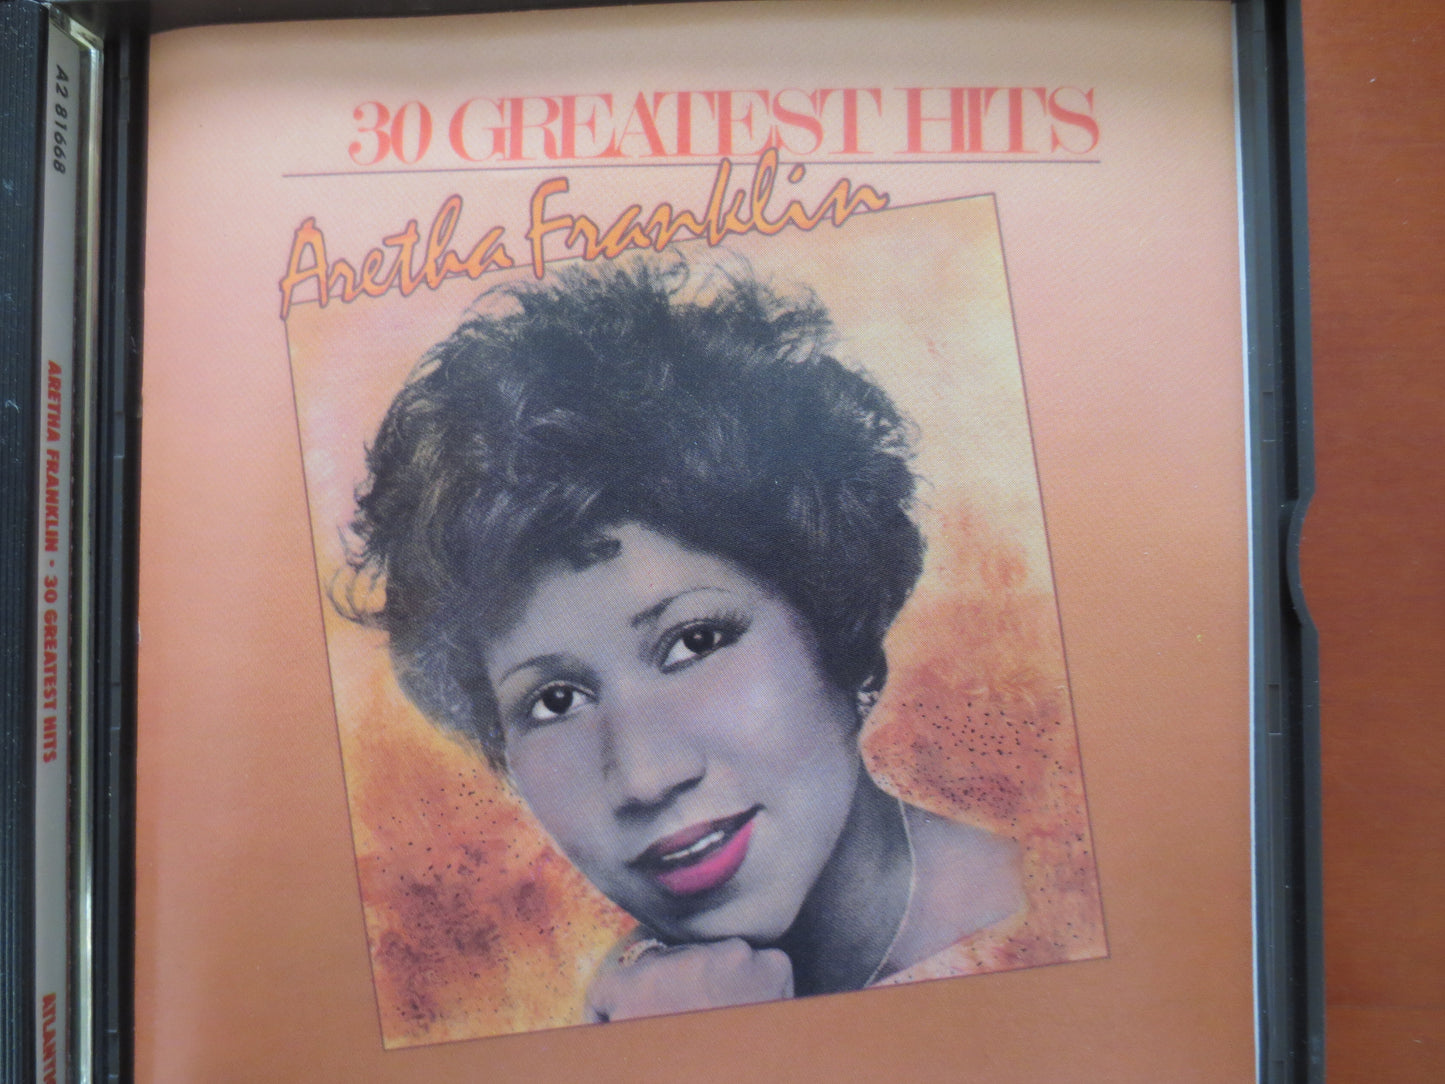 ARETHA FRANKLIN, 30 GREATEST Hits, Double Cd, Aretha Franklin Cd, Soul Music Cd, Classic Soul Cd, Pop Cd, 1986 Compact Disc